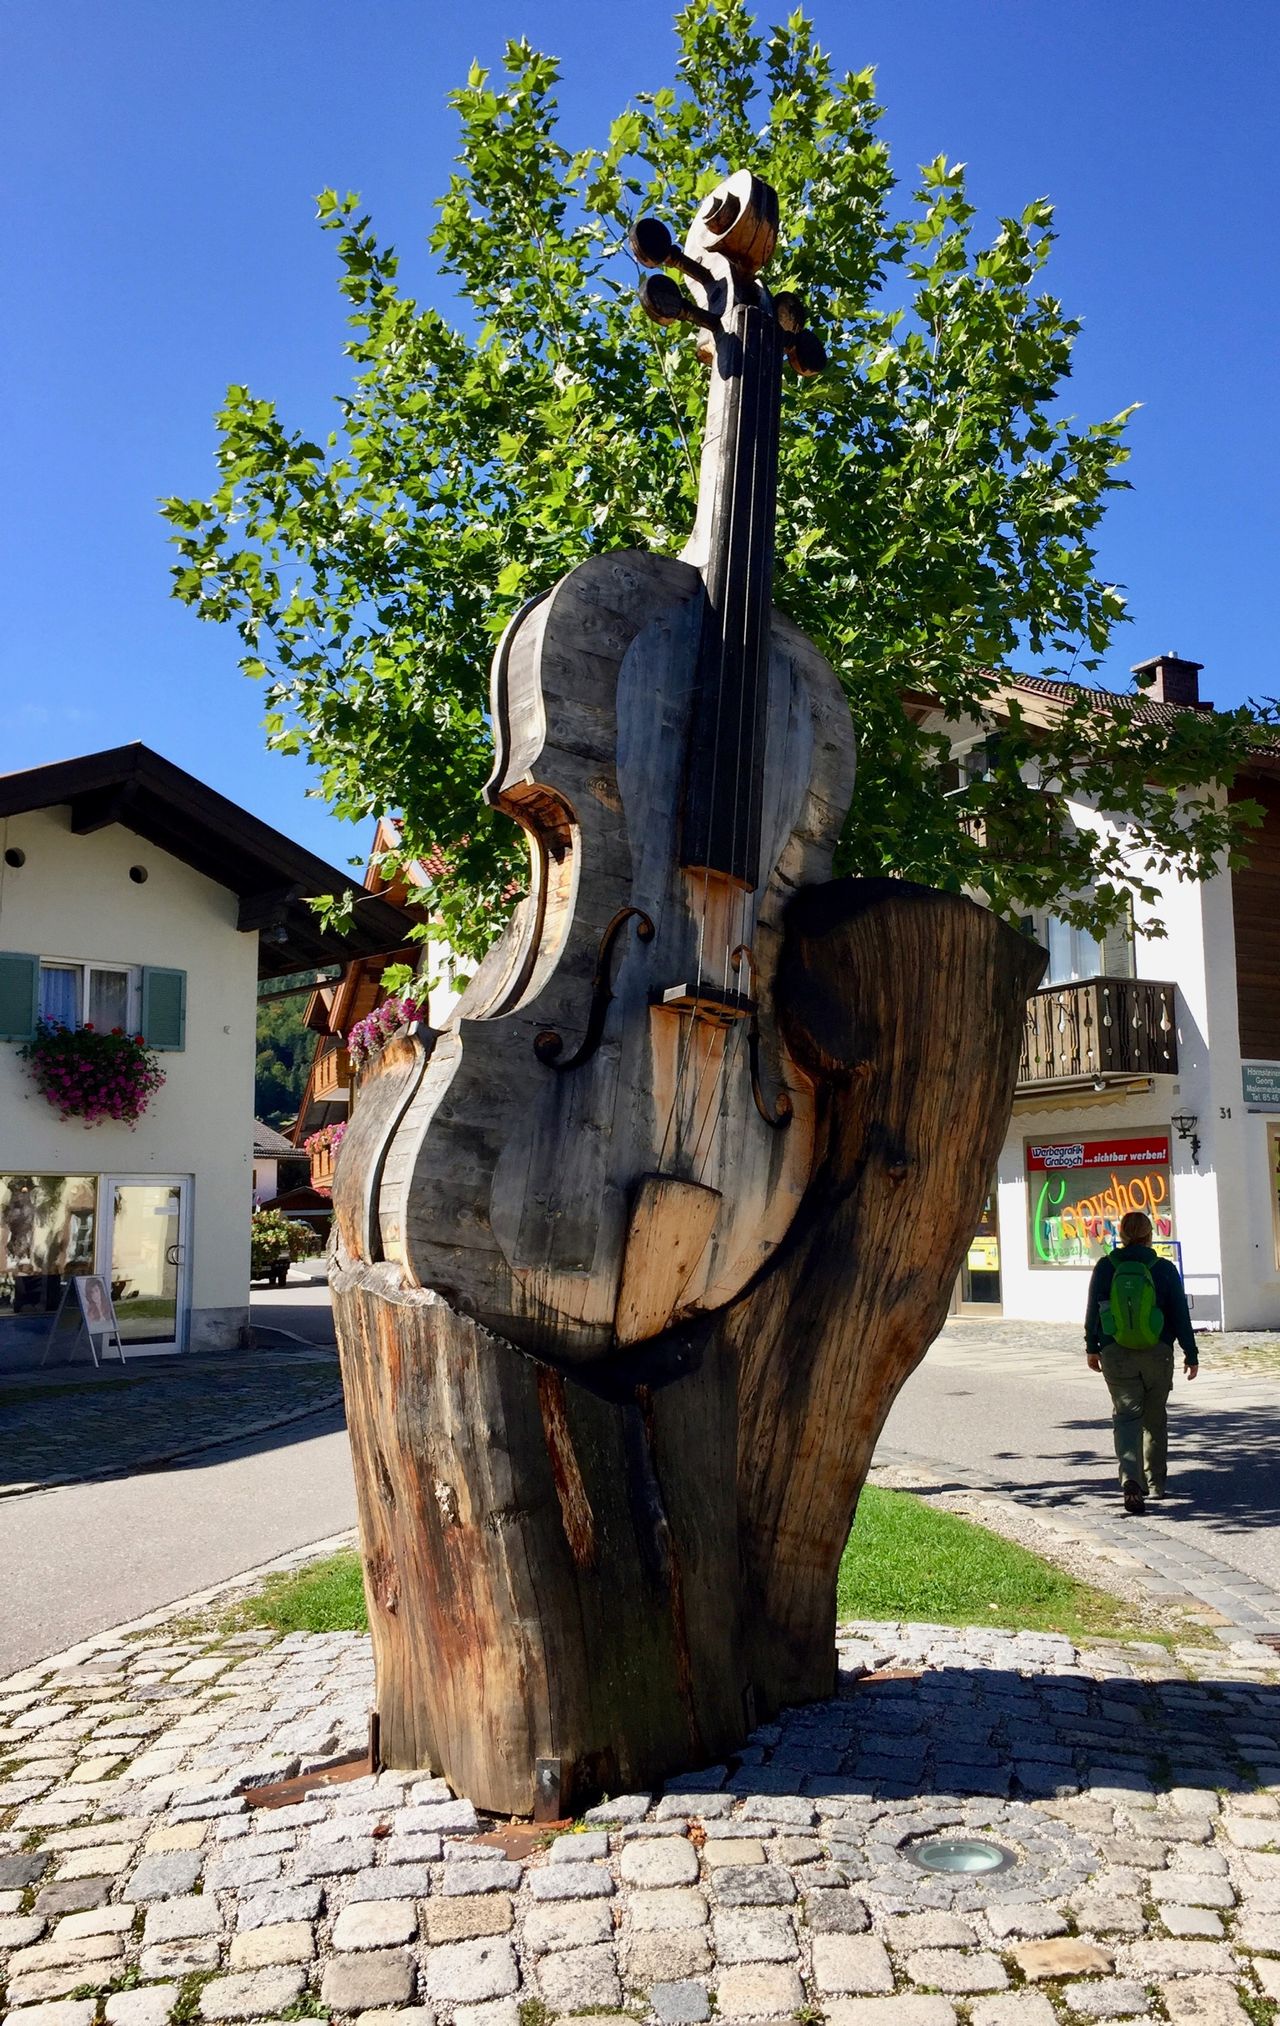 Wooden violin monument in town.